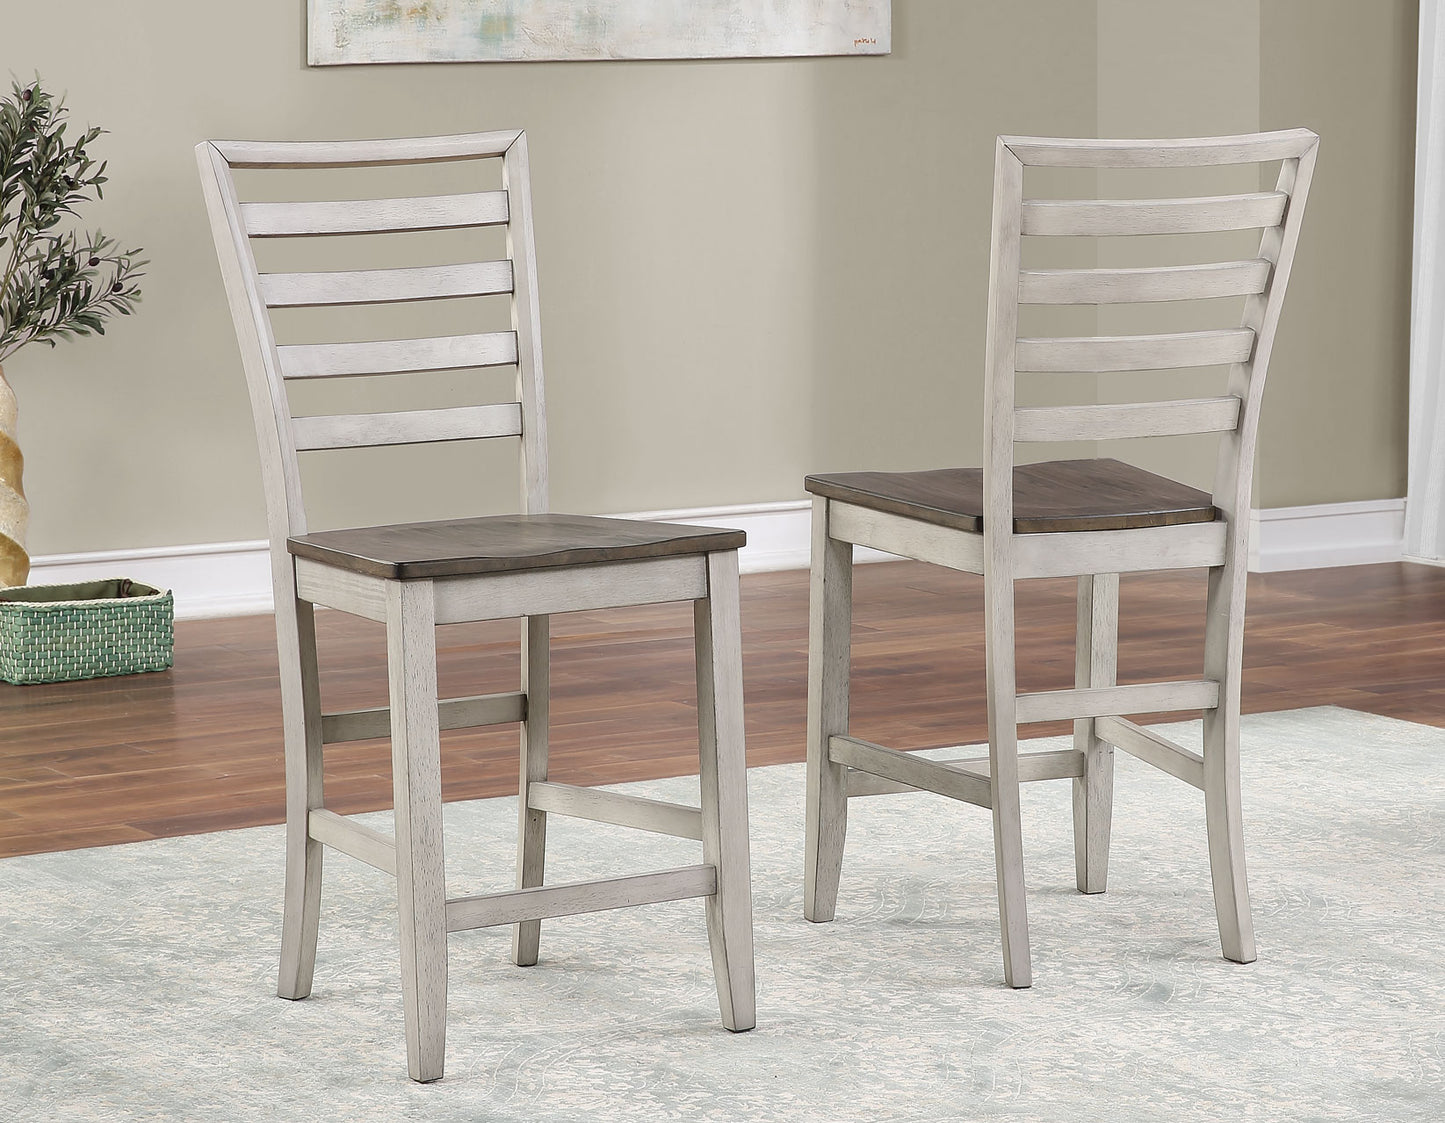 Abacus 5-Piece Counter Dining Set
(Counter Table & 4 Counter Chairs)